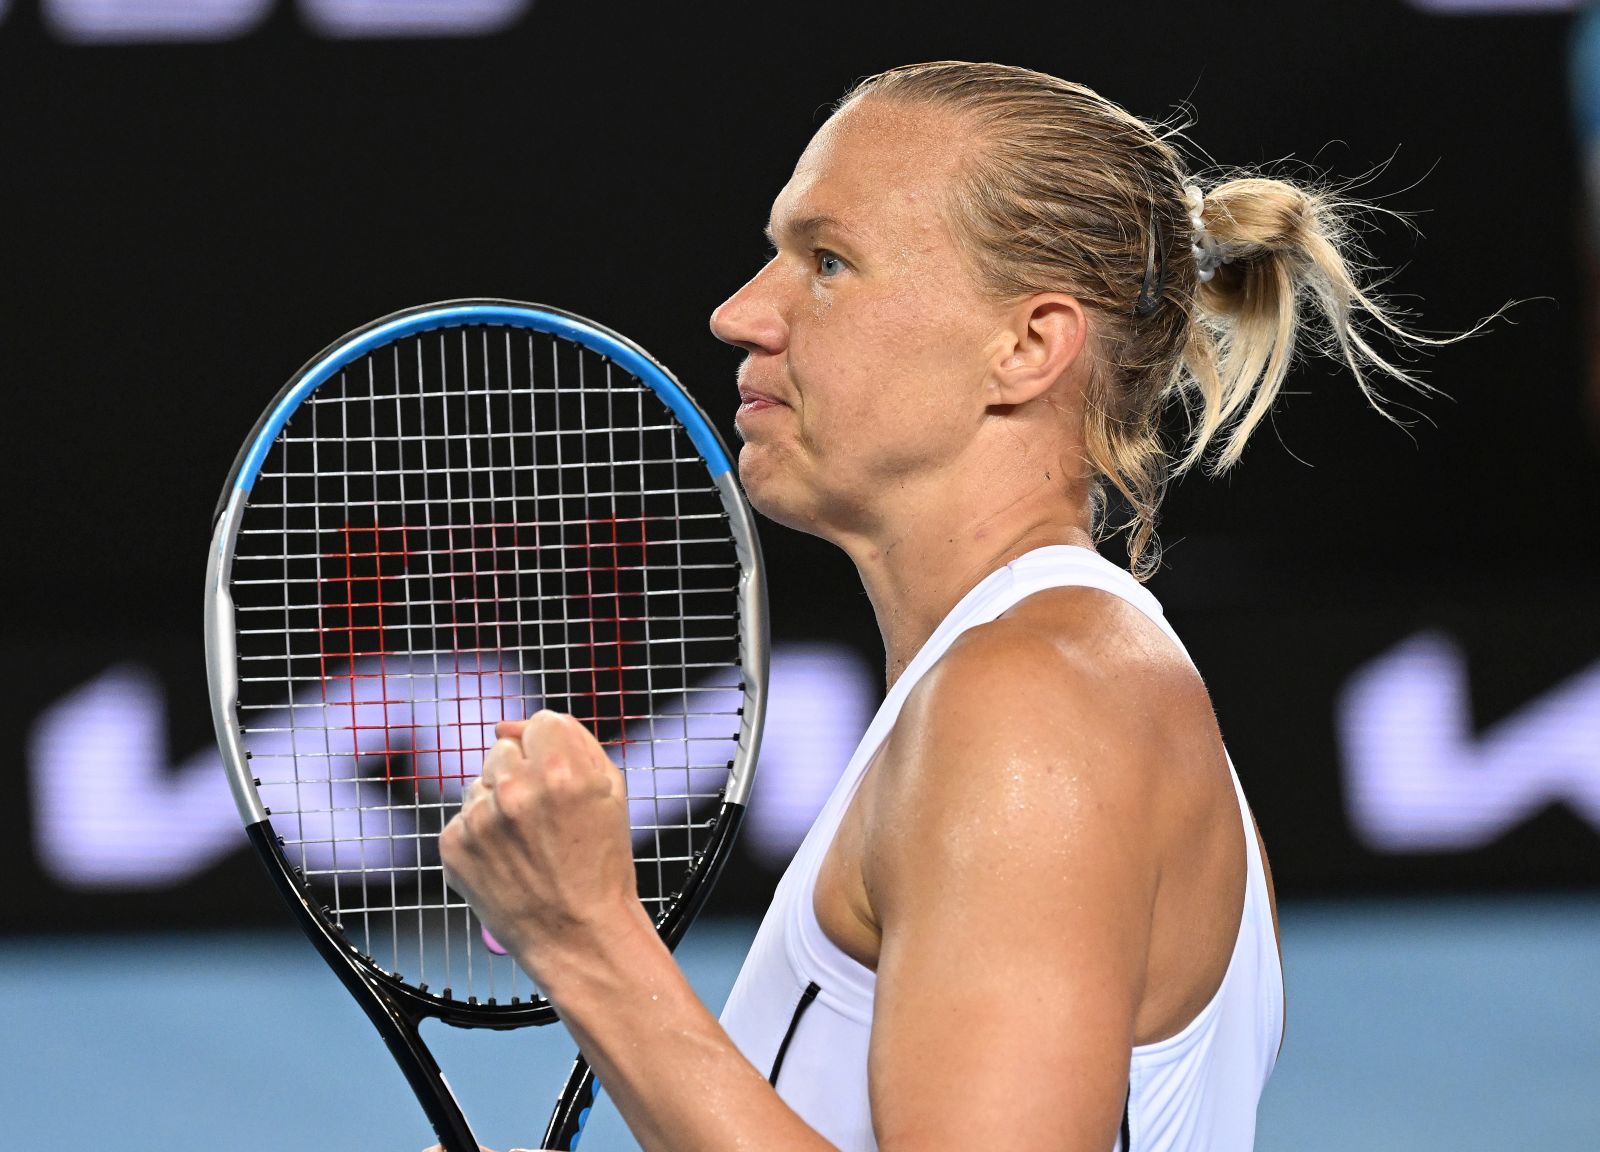 epa09706392 Kaia Kanepi of Estonia reacts after winning  her 4th round singles match against Aryna Sabalenka of Belarus at the Australian Open Grand Slam tennis tournament at Melbourne Park, in Melbourne, Australia, 25 January 2022.  EPA/DEAN LEWINS AUSTRALIA AND NEW ZEALAND OUT